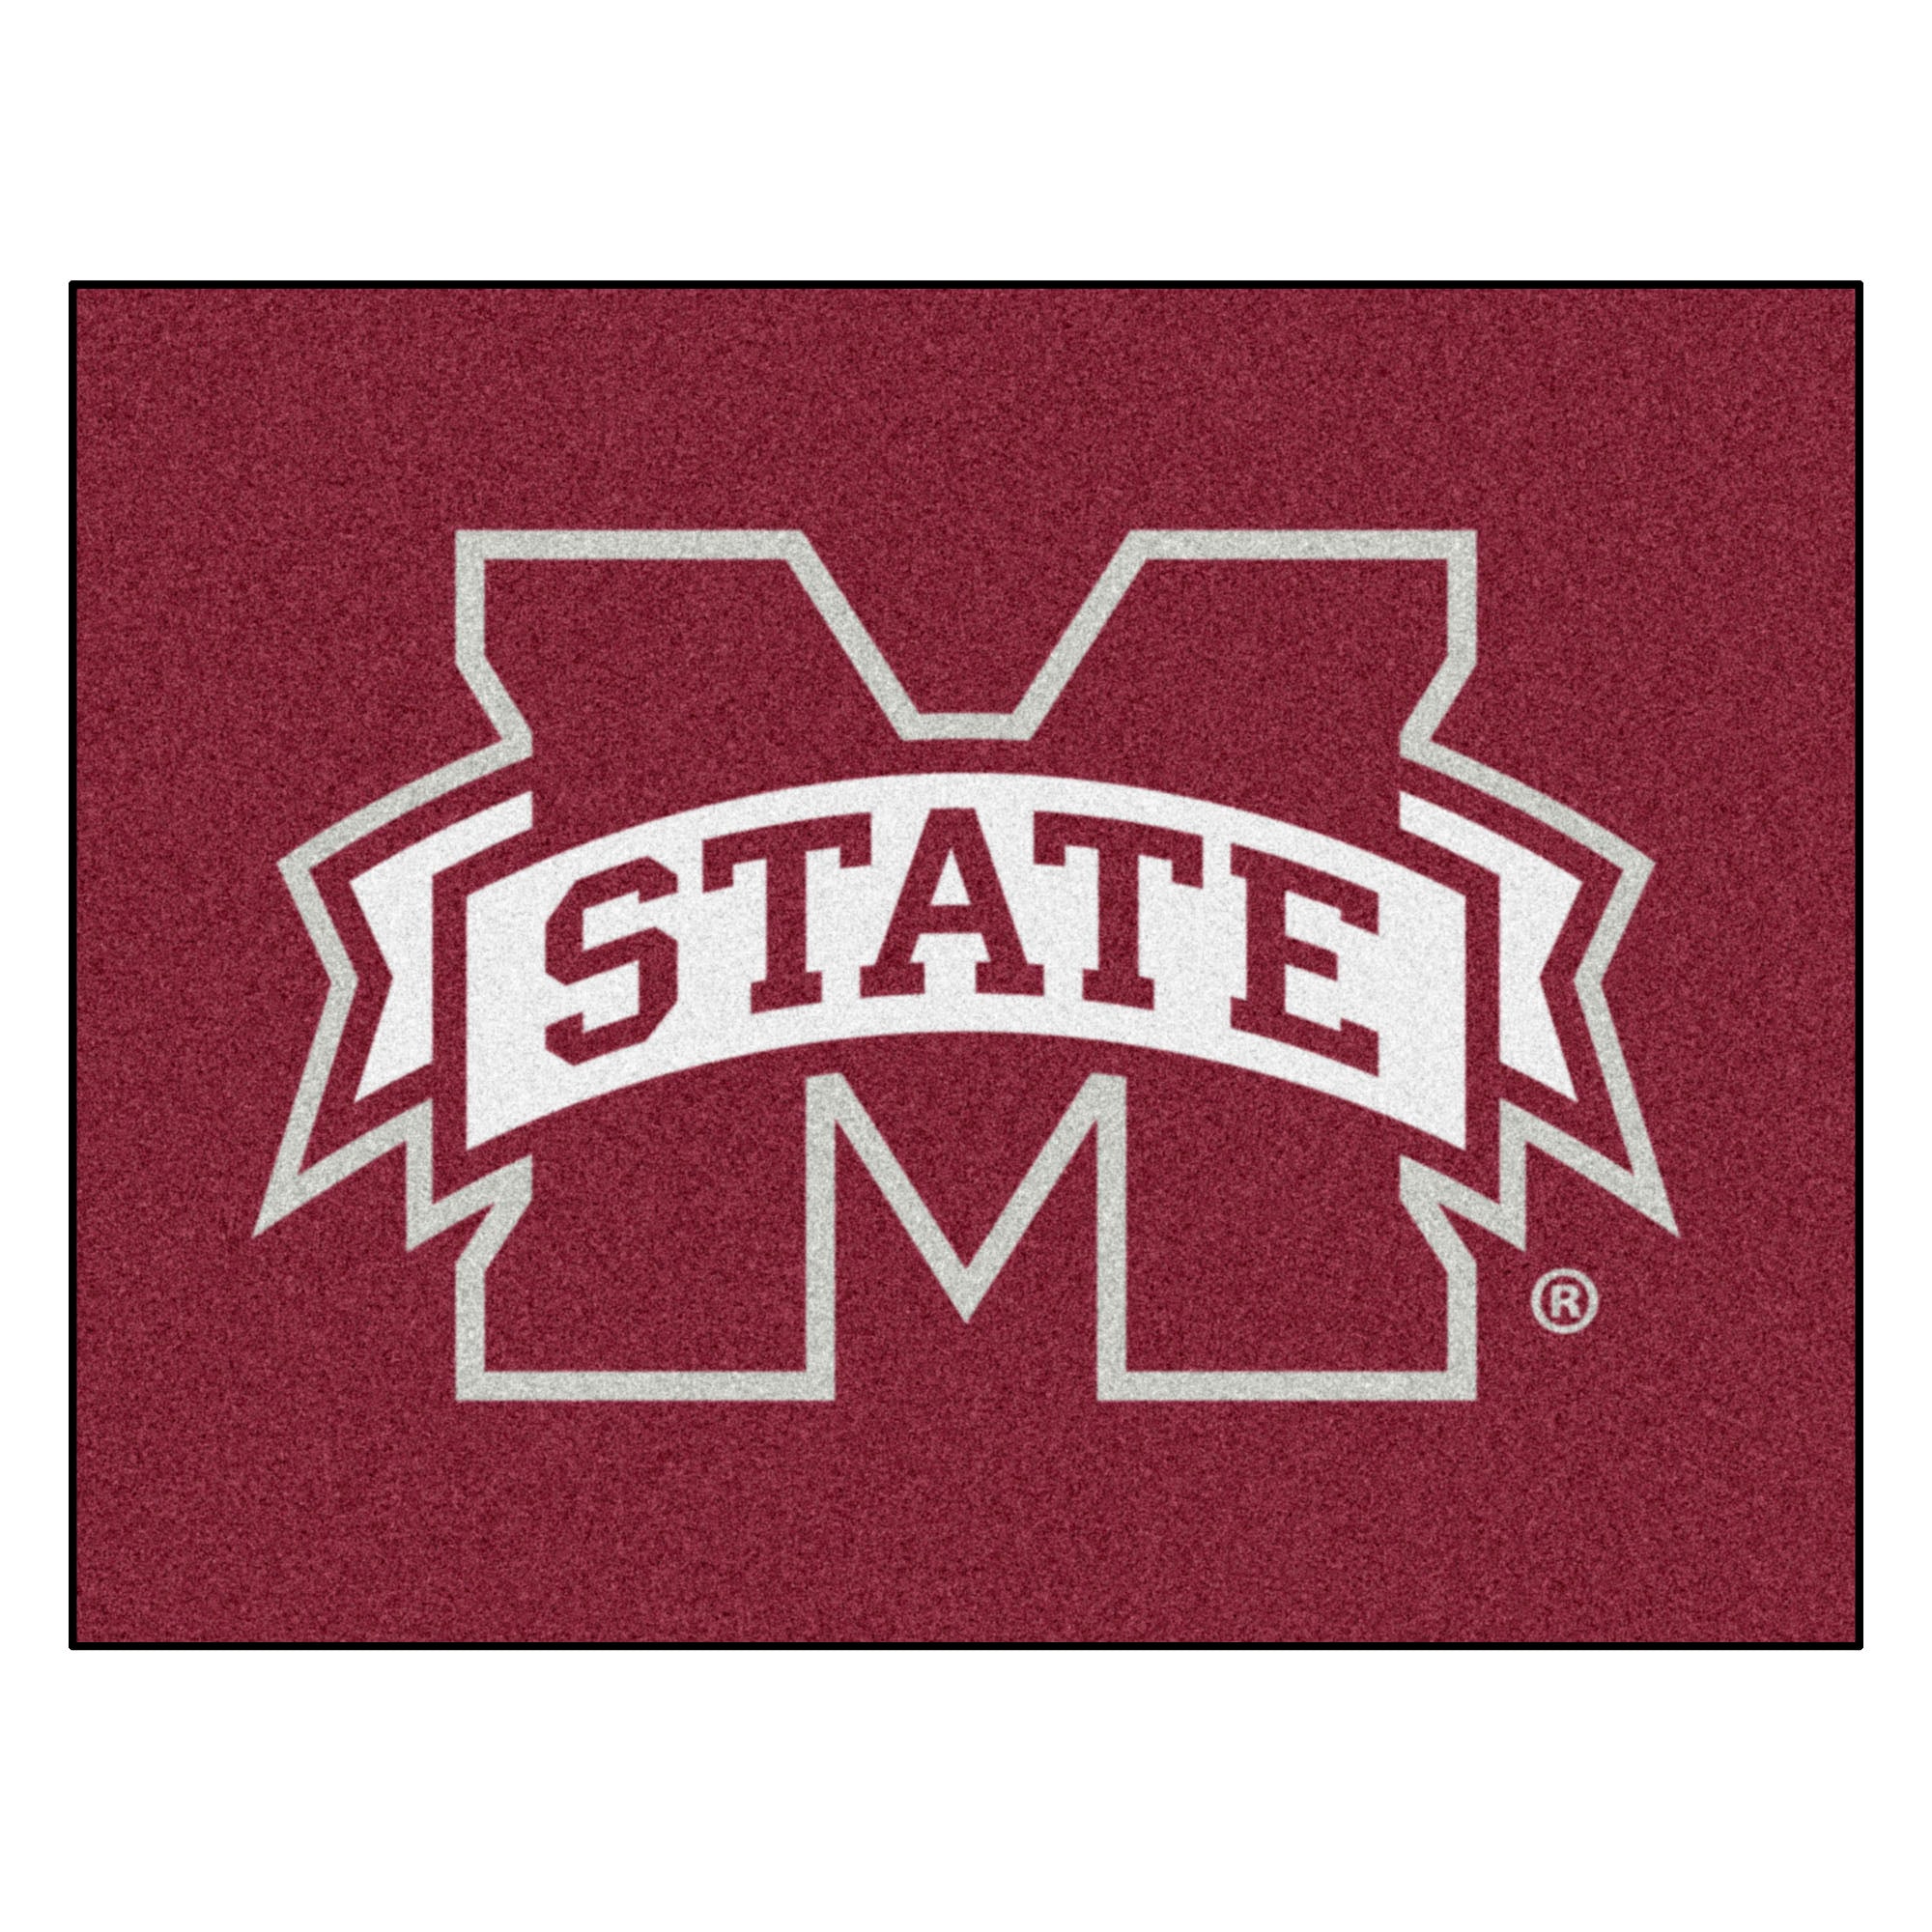 FANMATS, Mississippi State University Rug - 34 in. x 42.5 in.